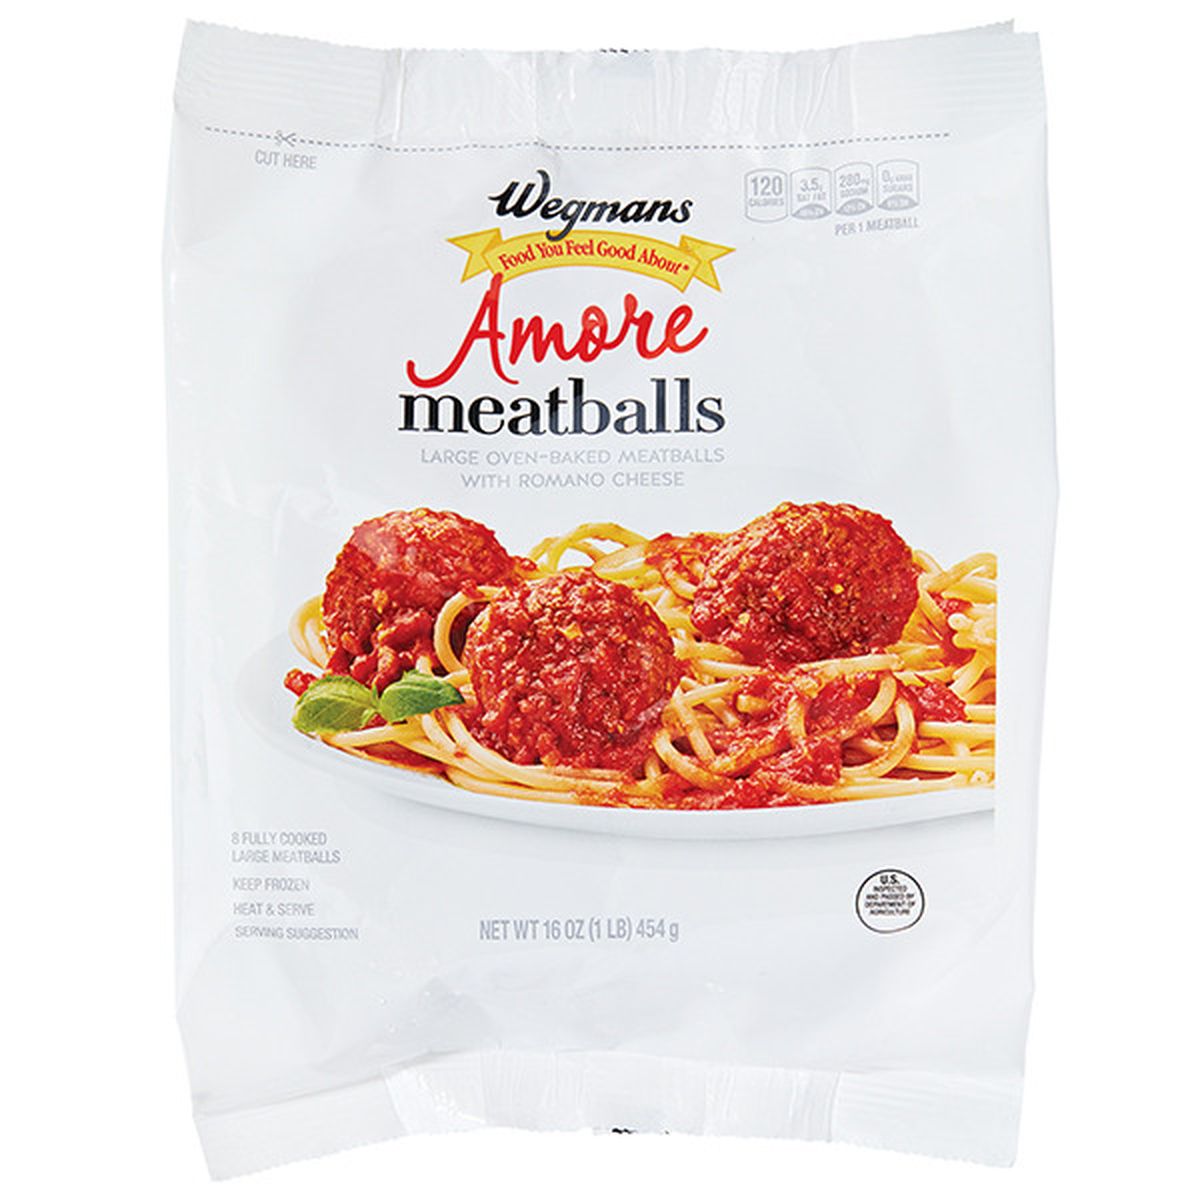 Calories in Wegmans Amore Oven-Baked Large Meatballs